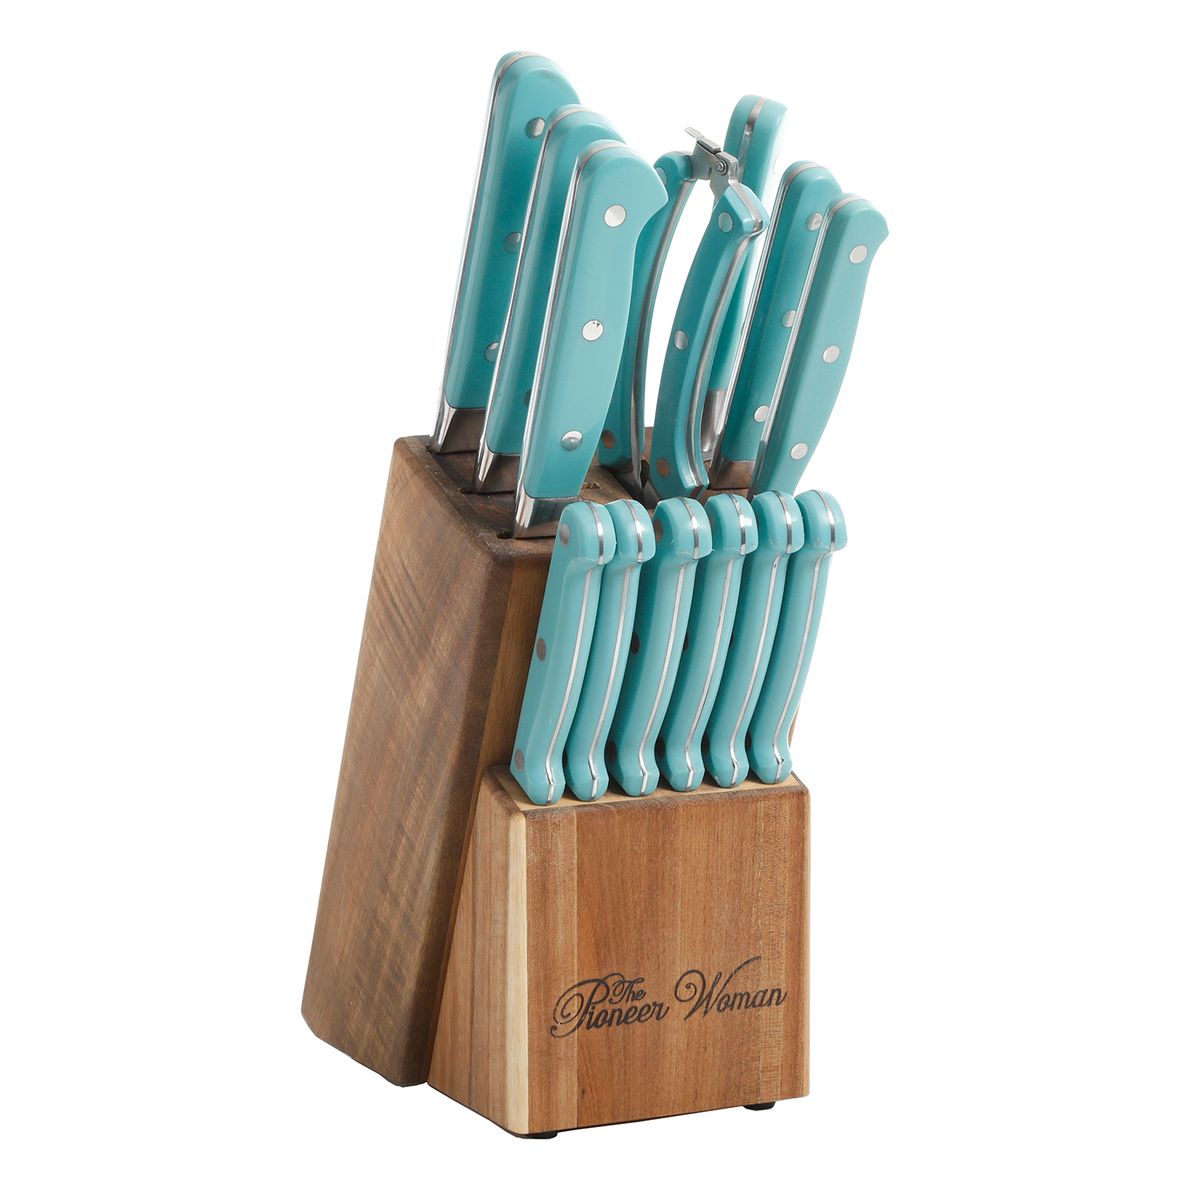 The Pioneer Woman Frontier Collection 14-Piece Cutlery Set with Wood Block